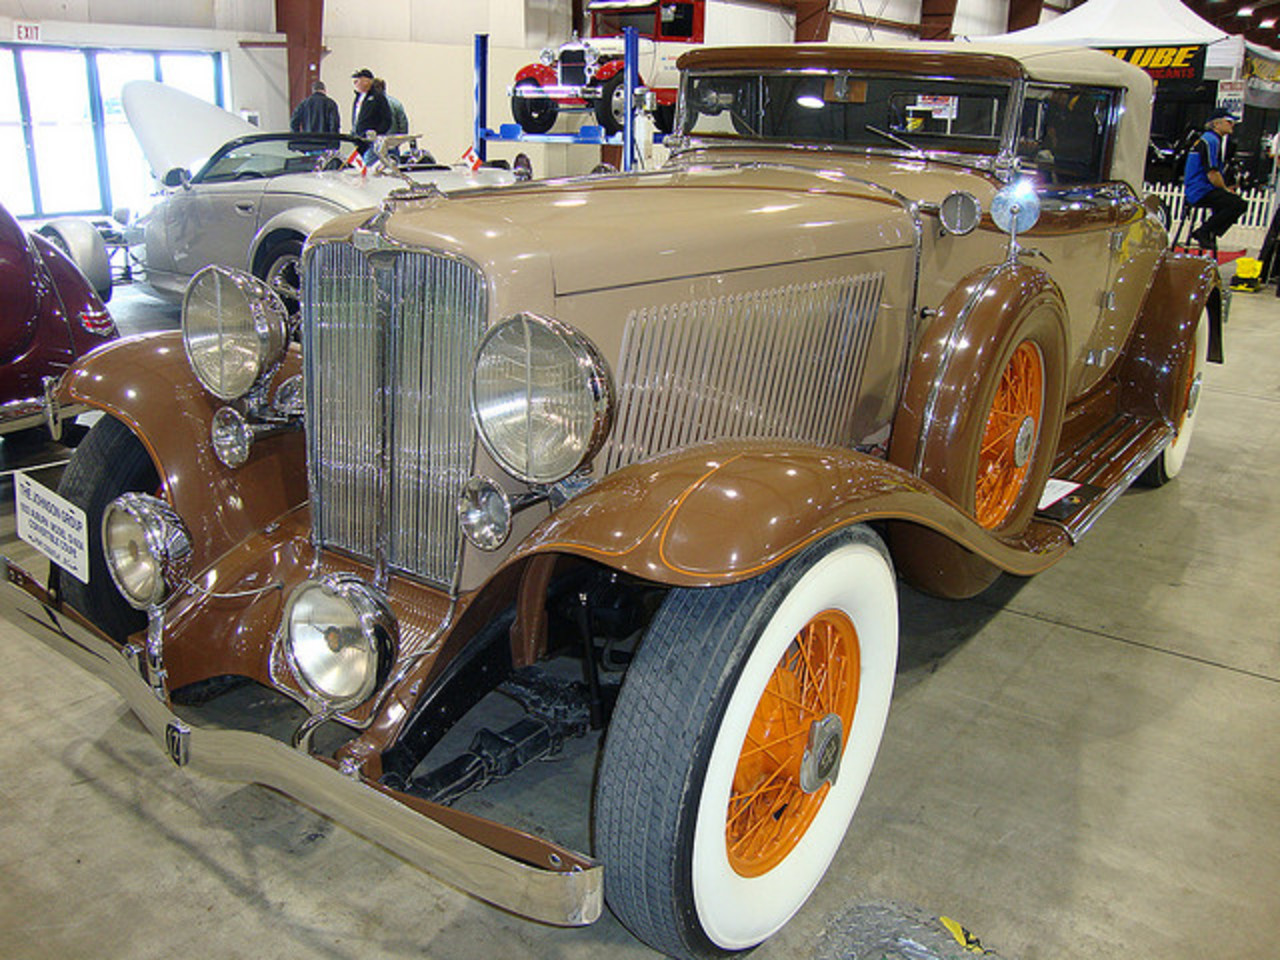 Auburn 8-100 Cabriolet Photo Gallery: Photo #09 out of 11, Image ...